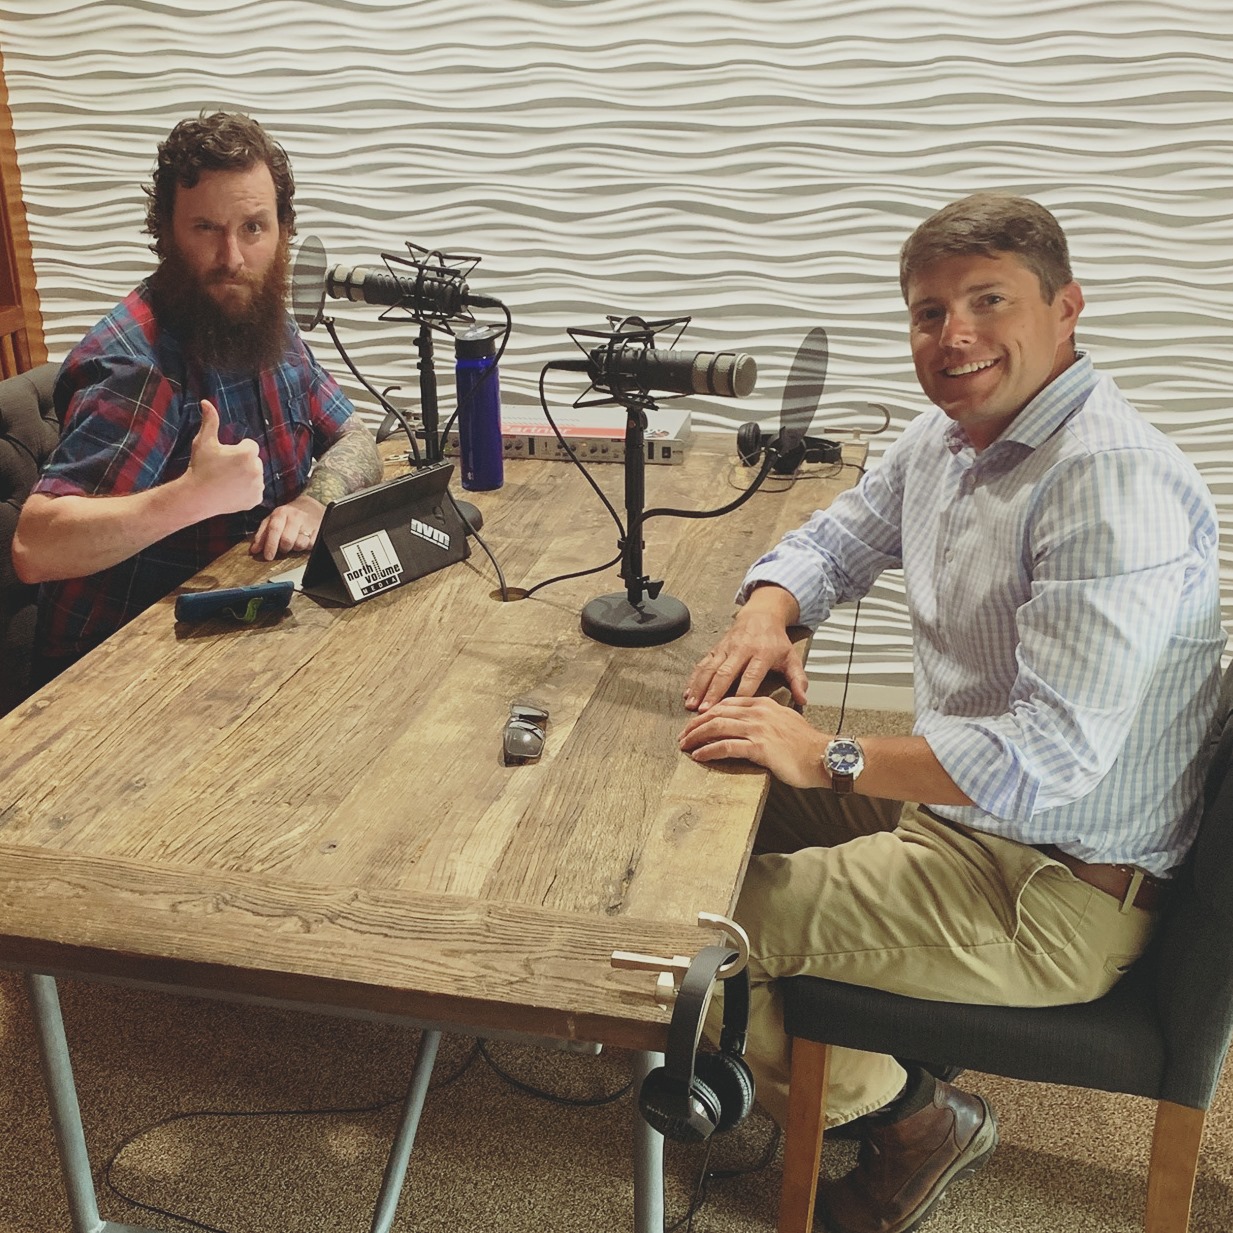 Assemblyman Billy Jones joined Nicholas Dubay at North Volume Media Studios to record an episode of the Mental Health Survival Guide Podcast in July 2019.